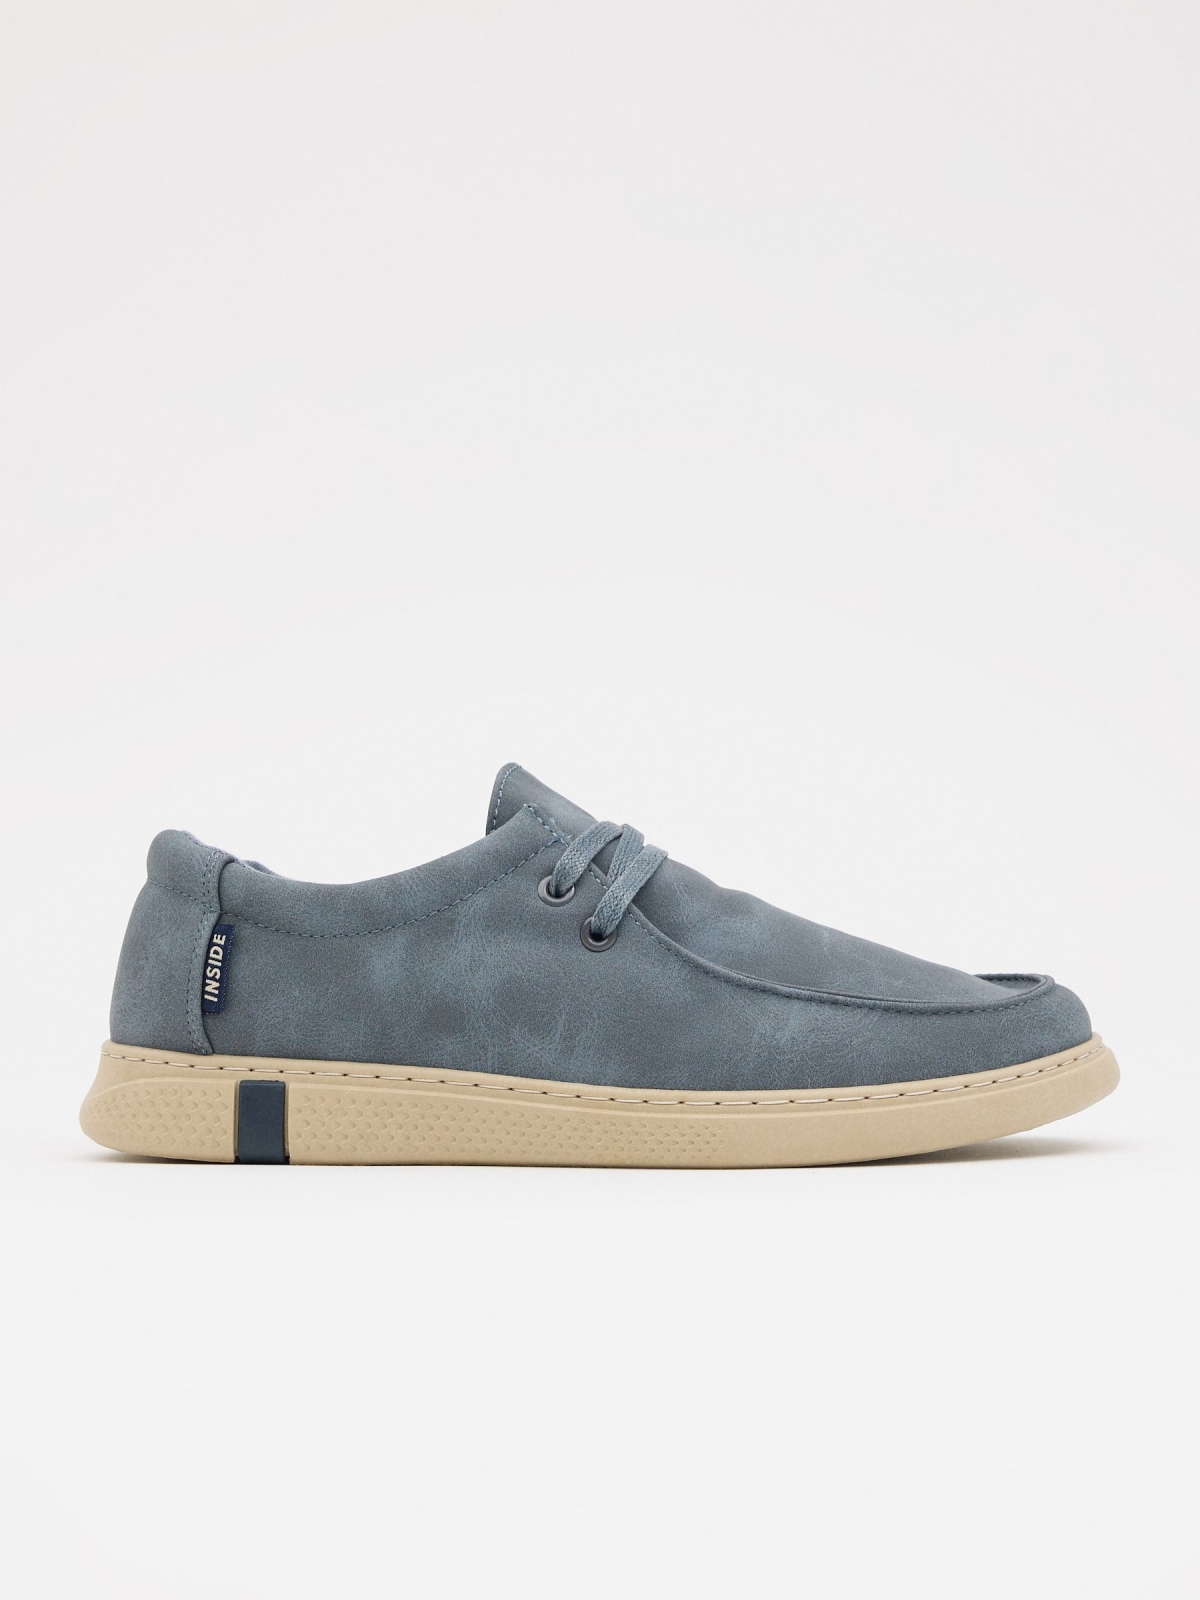 Sneaker Washed Casual Blue azul escuro